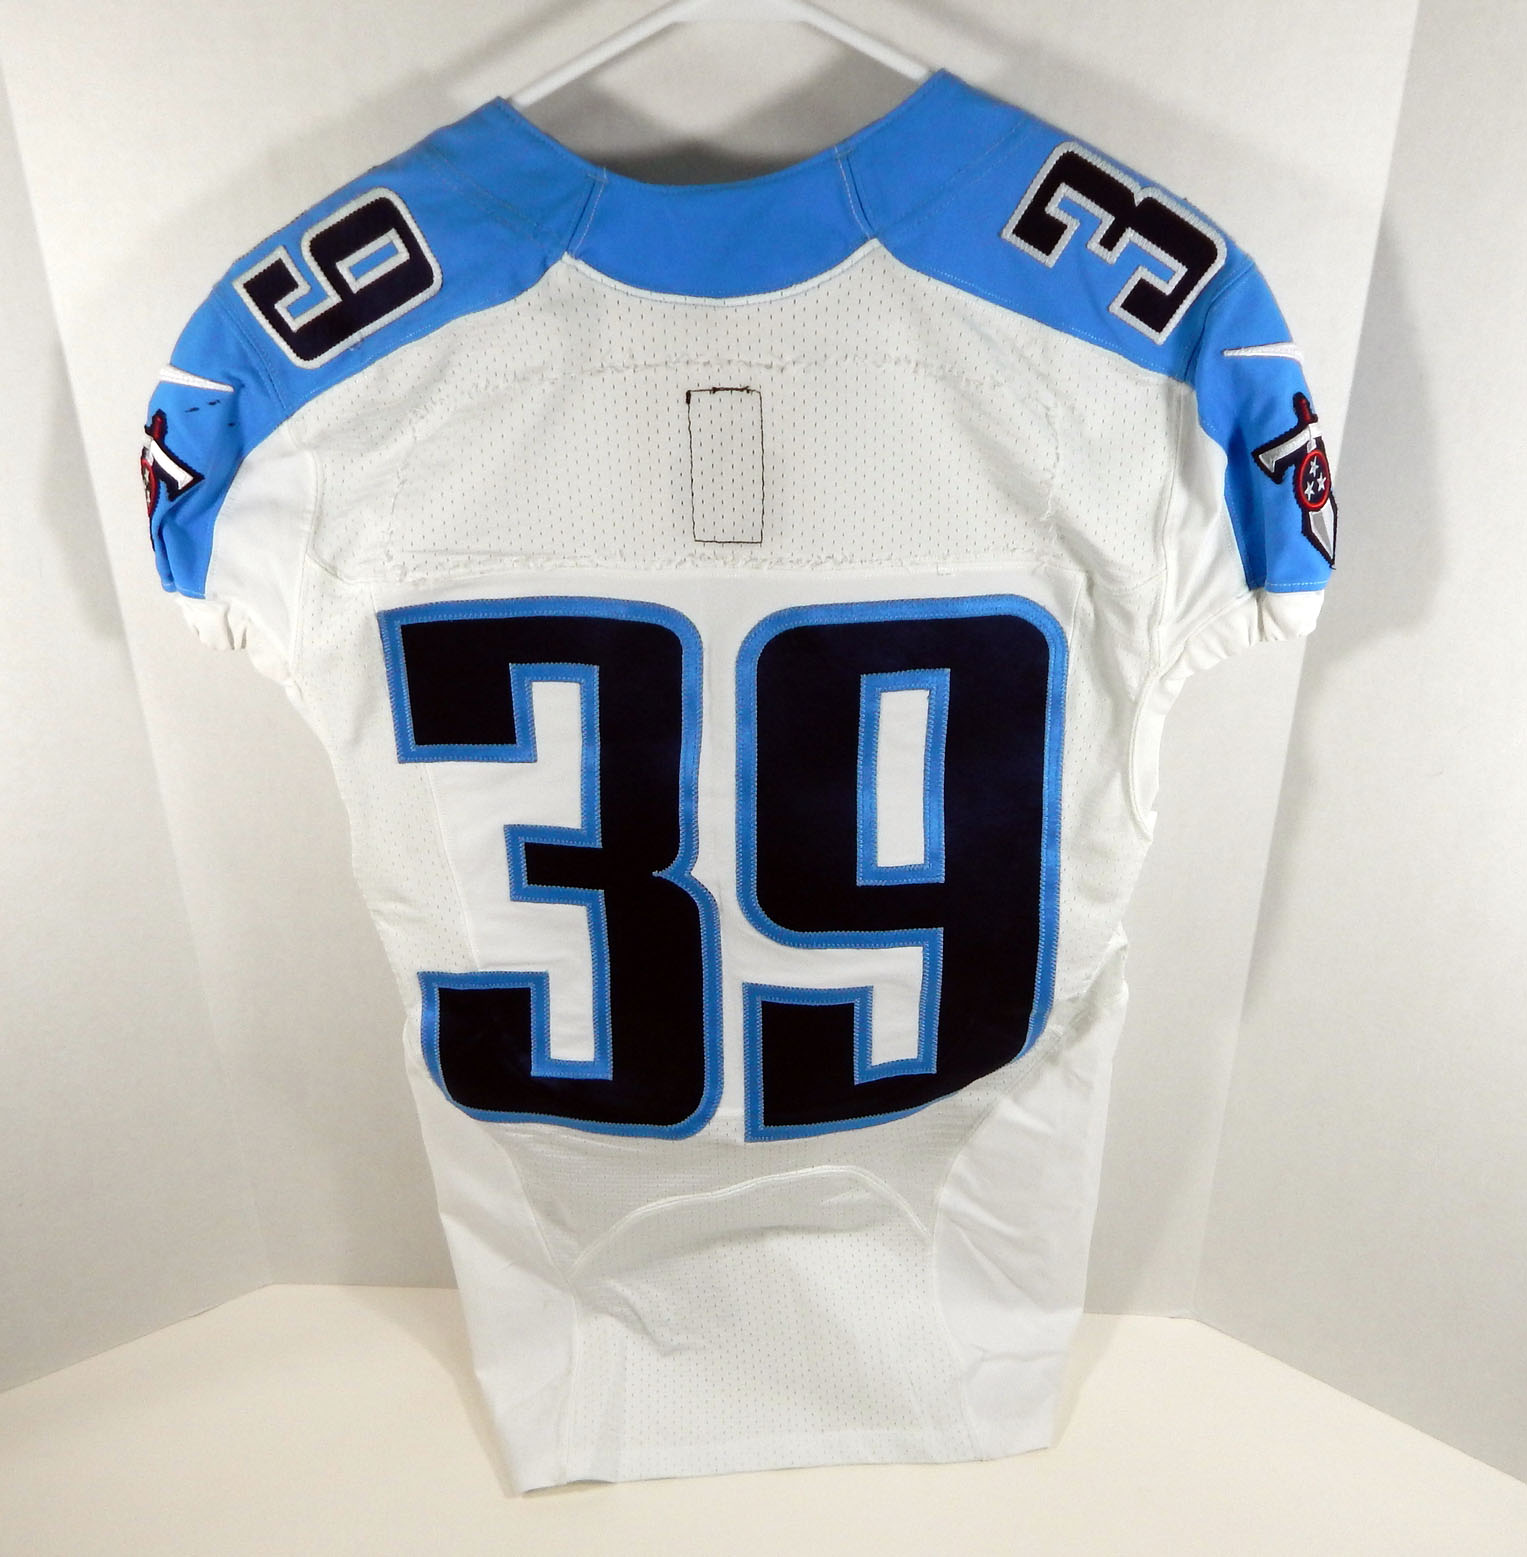 2016 Tennessee Titans #39 Game Issued White Jersey Titan0163 eBay